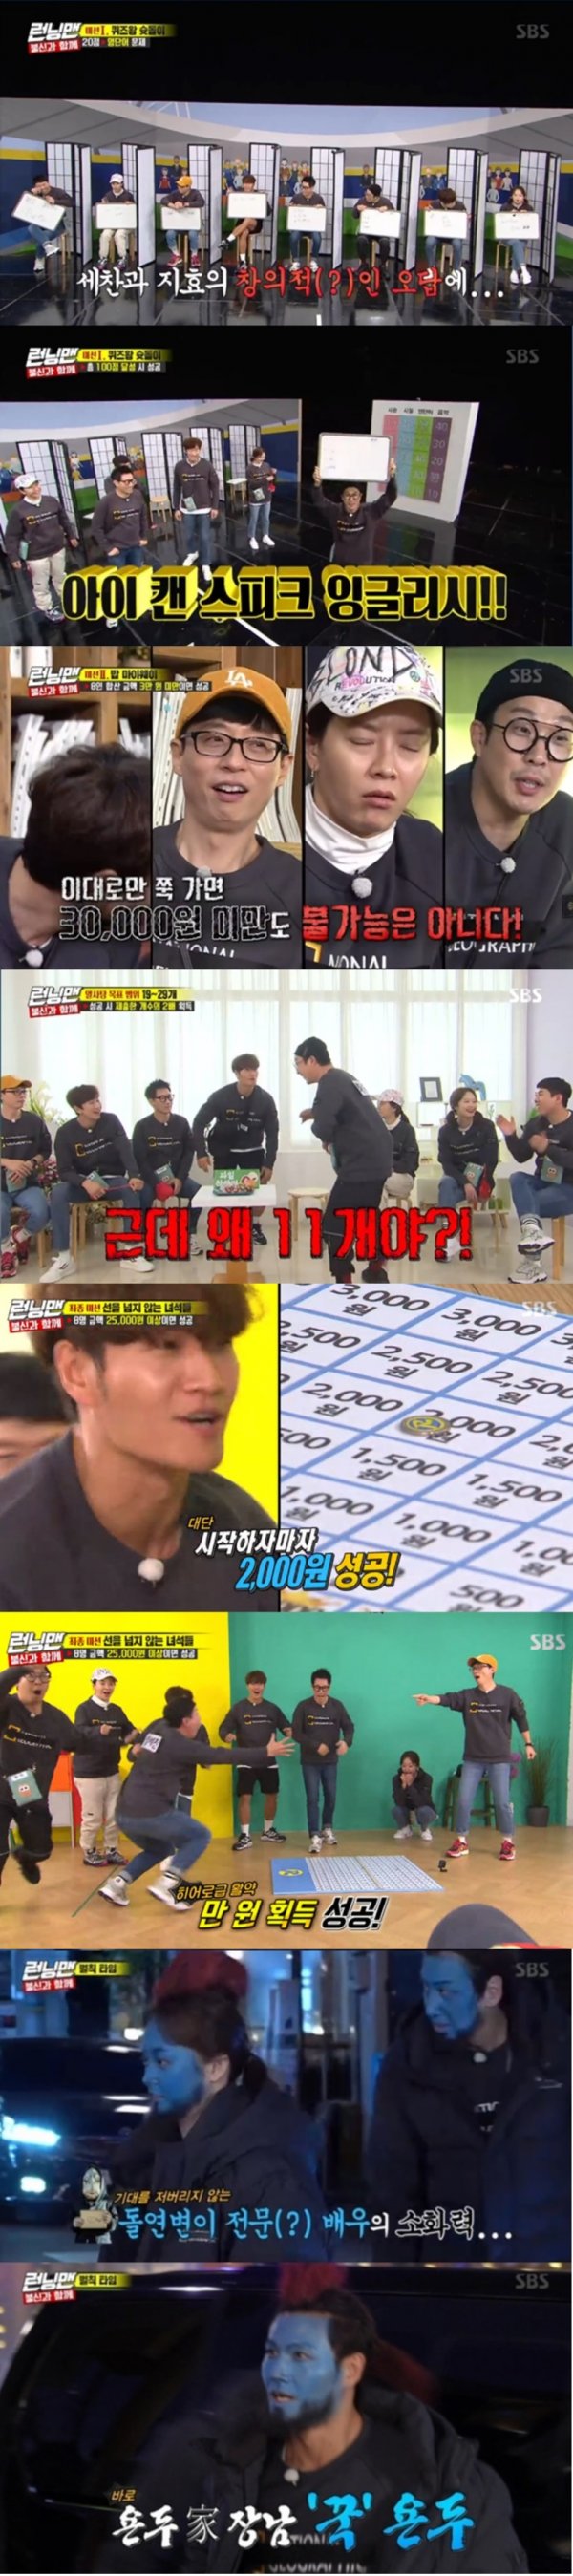 SBS Running Man kept the top spot in the same time zone of 2049 target TV viewer ratings.According to Nielsen Korea, a TV viewer rating research institute, Running Man, which was broadcast on the 1st, recorded 4.1% of 2049 target TV viewer ratings (based on the second part of the Seoul metropolitan area furniture TV viewer ratings).The average TV viewer ratings were 5.5% in the first part and 7.6% in the second part, while the highest TV viewer ratings per minute soared to 8.4%.The broadcast was featured in a special united race with distrust, which was set up for members who had been suspicious and fraught in the past few weeks.In the first mission, The King of Quiz had to be unanimously correct, with all kinds of fouls and the wrong answers of Jeon So-min, but the correct answers came out.In the second mission Bob My Way, Jeon So-min was prominent.One of the eight different menus with different prices was private, and if the sum was less than 30,000 won, it was a power pass.With Ji Suk-jin opting for a high-priced soy sauce, Jeon So-min chose a boiled egg and all the members ate well.On the other hand, the third mission, Answer the Category, which is successful when all the people say the category presented in 8 seconds, failed, and once again the members distrust raised their heads and laughed.Fortunately, in the final mission The Guys who do not cross the line, Yang Se-chan won a 10,000 won in his performance and gave a warm heart.Yang Se-chan won the penalty exemption by ranking first by member, and the penalty was confirmed when Jeon So-min and Lee Kwang-soo were ranked 7th and 8th.The penalists Jeon So-min and Lee Kwang-soo had to sell Bungeo-pang on the street with the Running Man-pyo Megahit makeup Yondu makeup, and pointed out Kim Jong-kook as additional penalties.The three humiliation sales sites rose to 8.4% of the highest TV viewer ratings per minute, accounting for the best one minute.